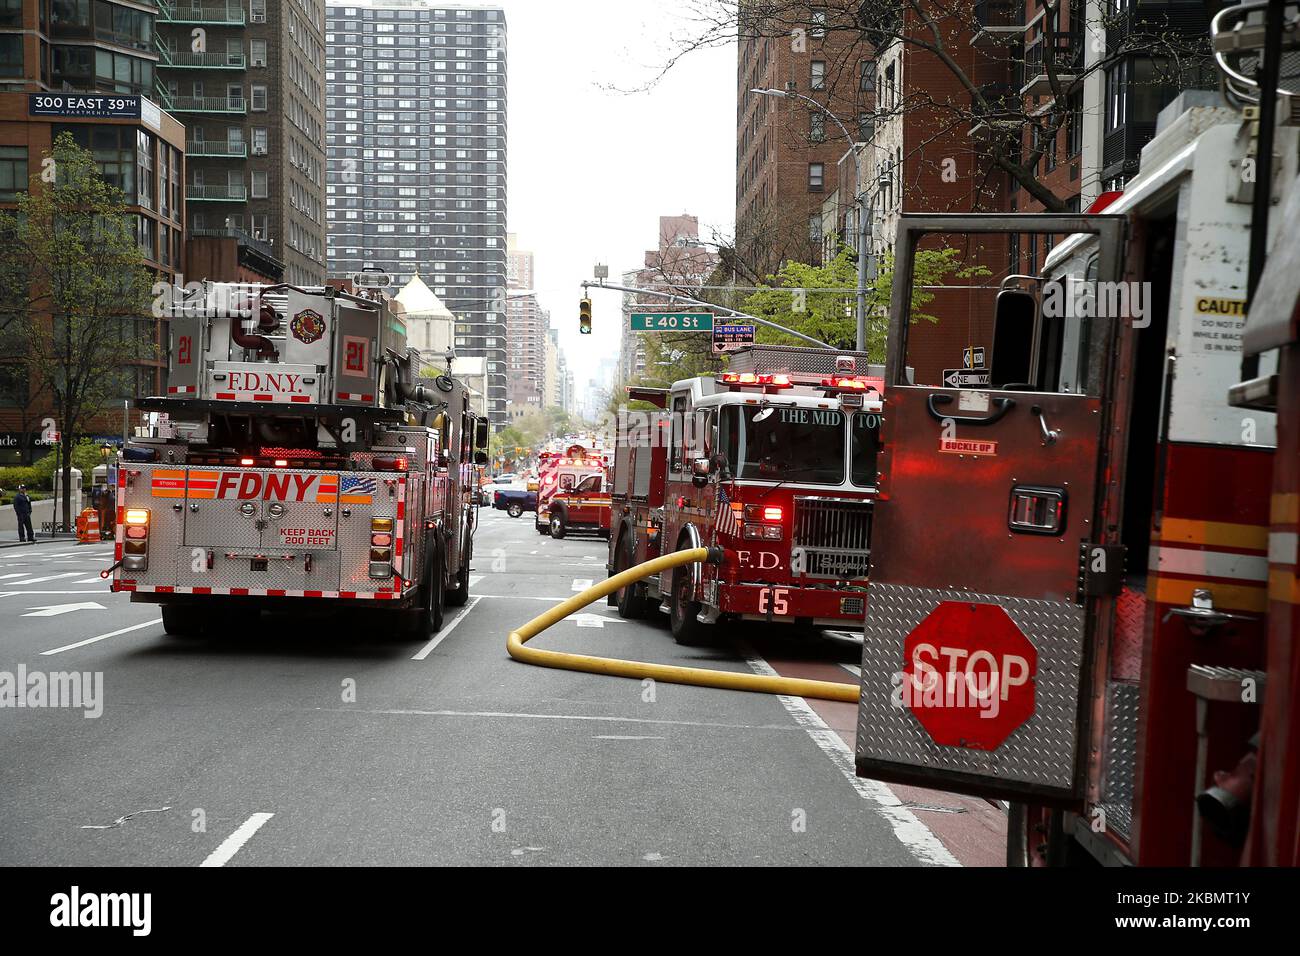 Fire truck stand at the ready in New York, on April 23, 2020. New York Fire Department and Emergency services technicians were dispatched to a high-rise in New York City on April 23, 2020. Scores of firetrucks, ambulances and EMT rescue medics stood ready in front of Murray Hill towers on 2nd Avenue. (Photo by John Lamparski/NurPhoto) Stock Photo